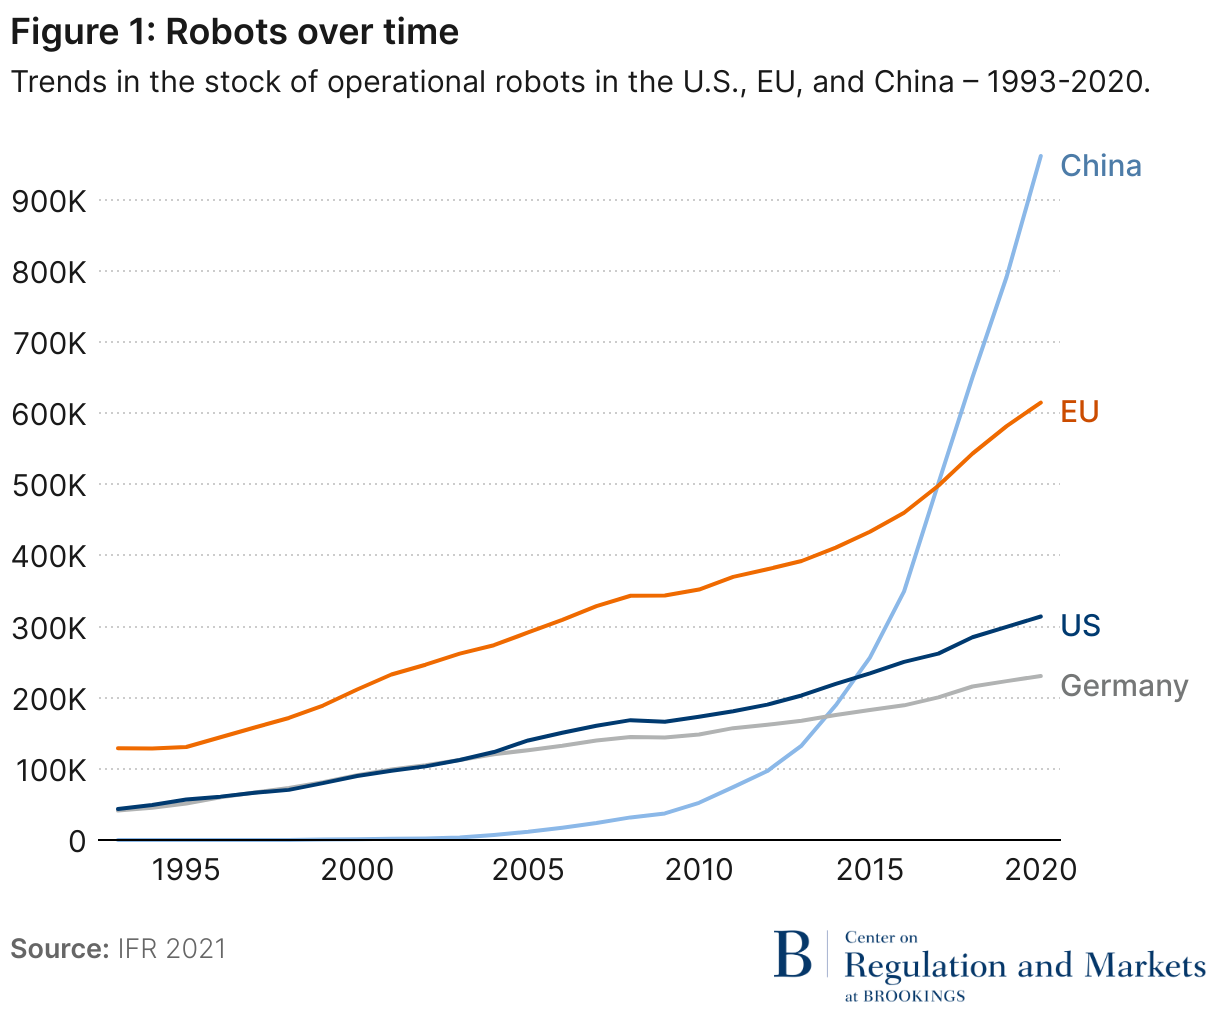 Figure shows dramatic growth in operational robots, especially in China between 2005 and 2020.